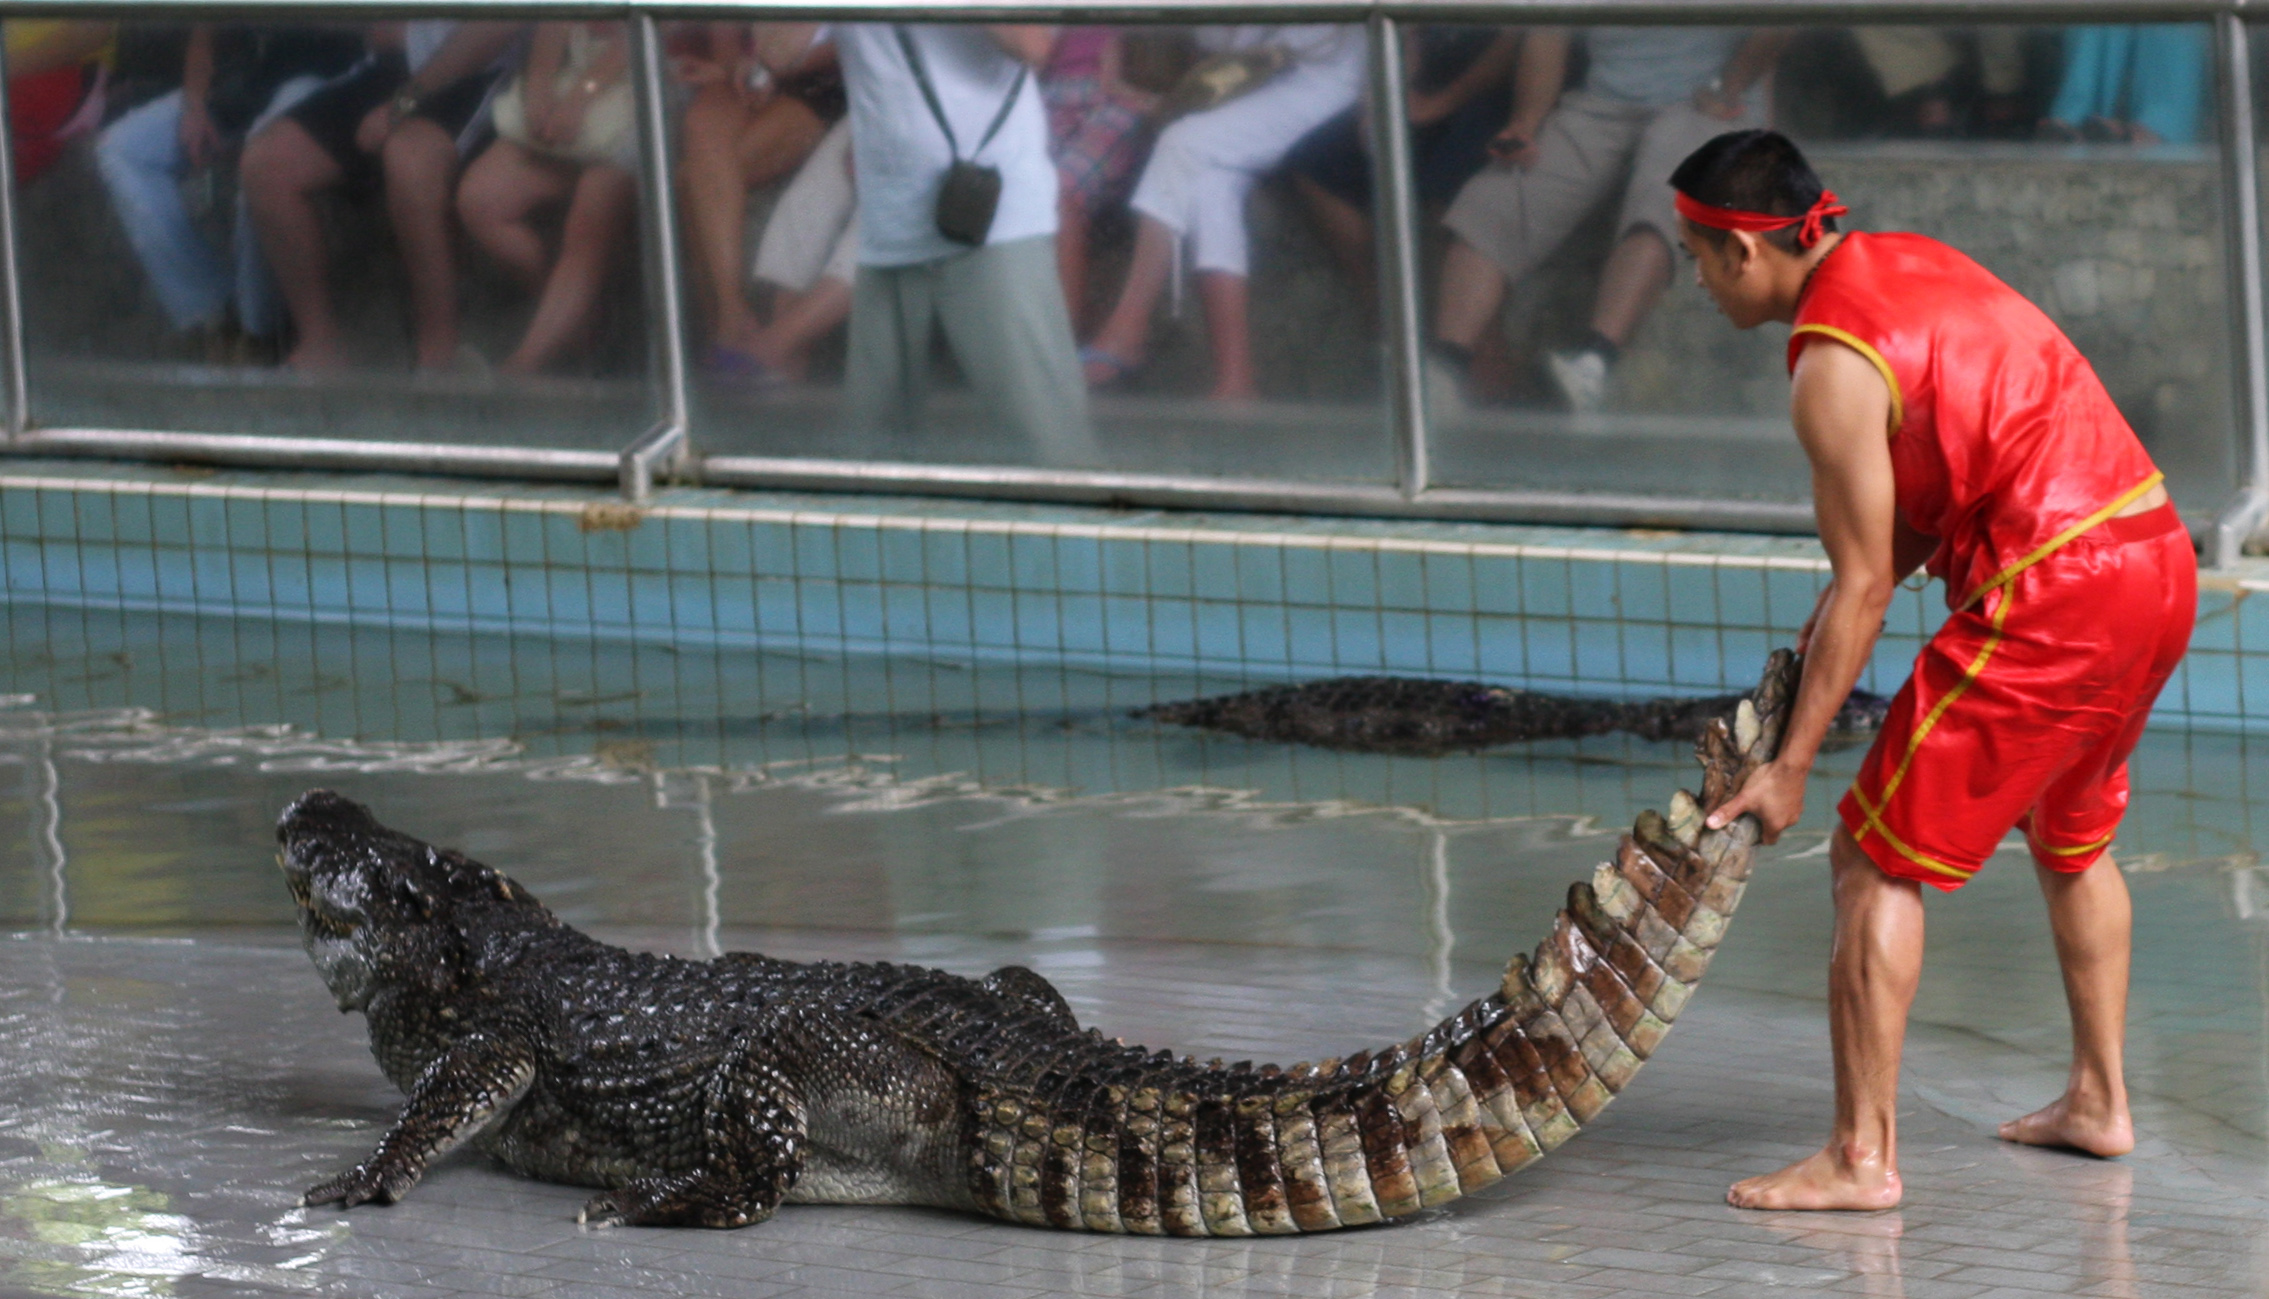 the man in red is holding the alligator